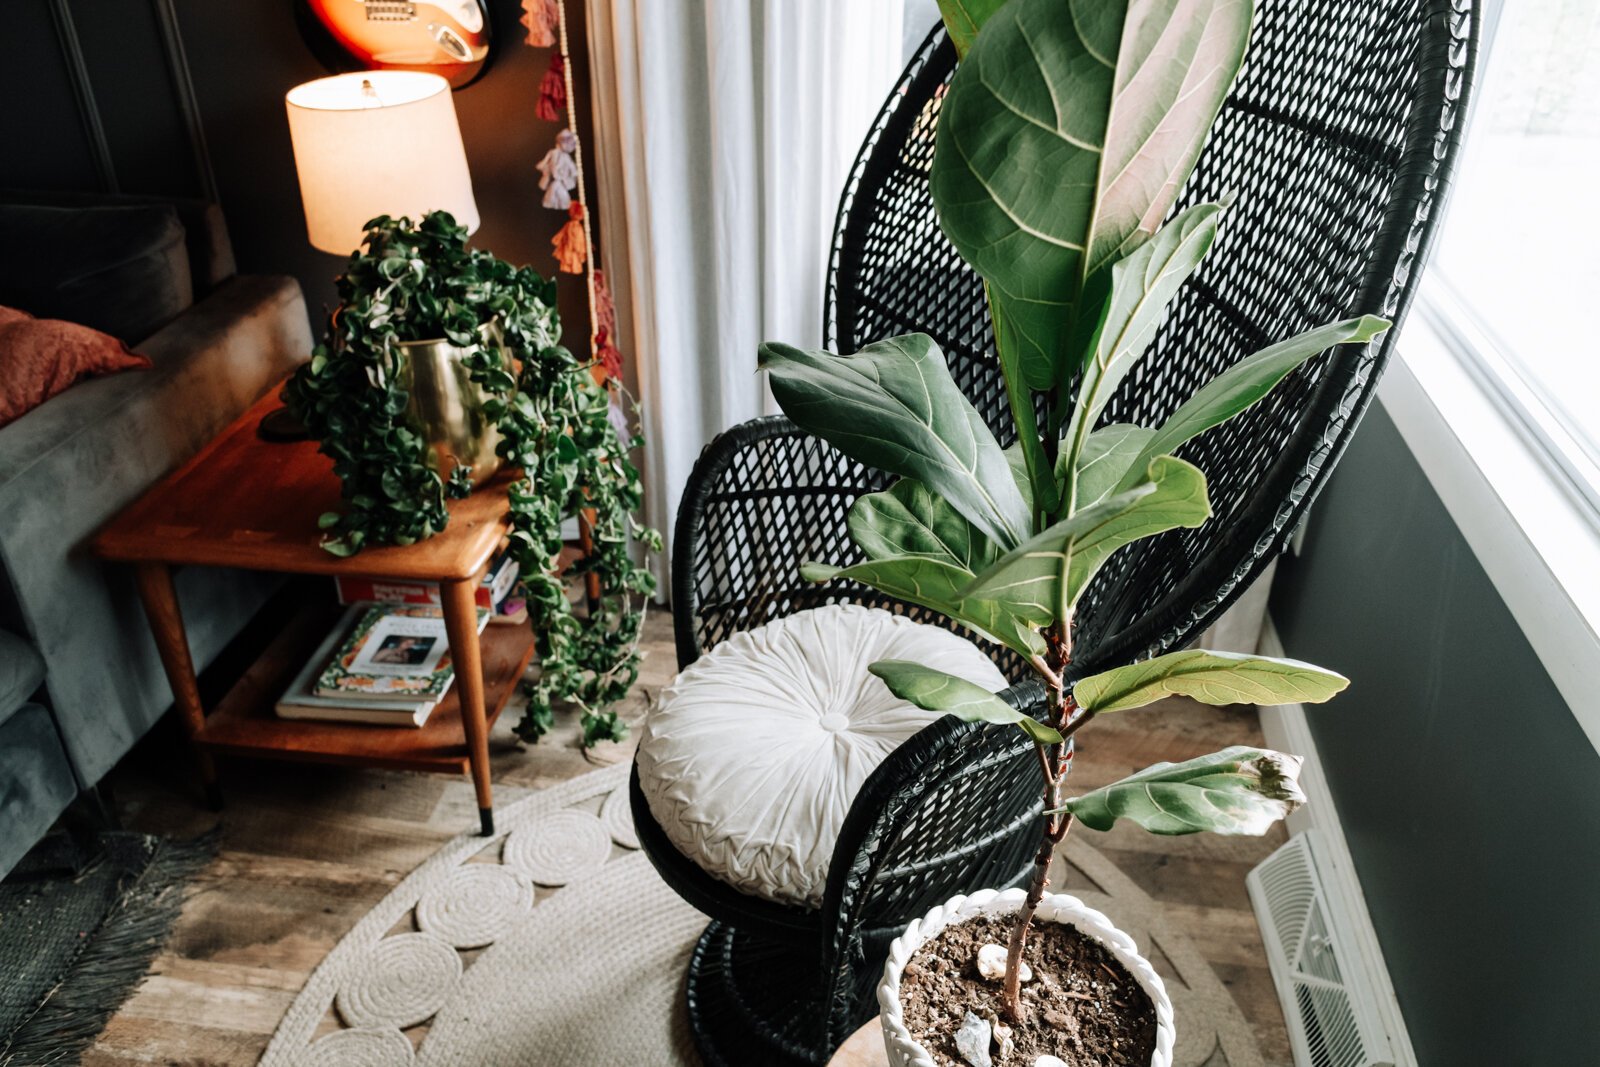 Plants make up a big part of the decor at the home of the Keefe family.